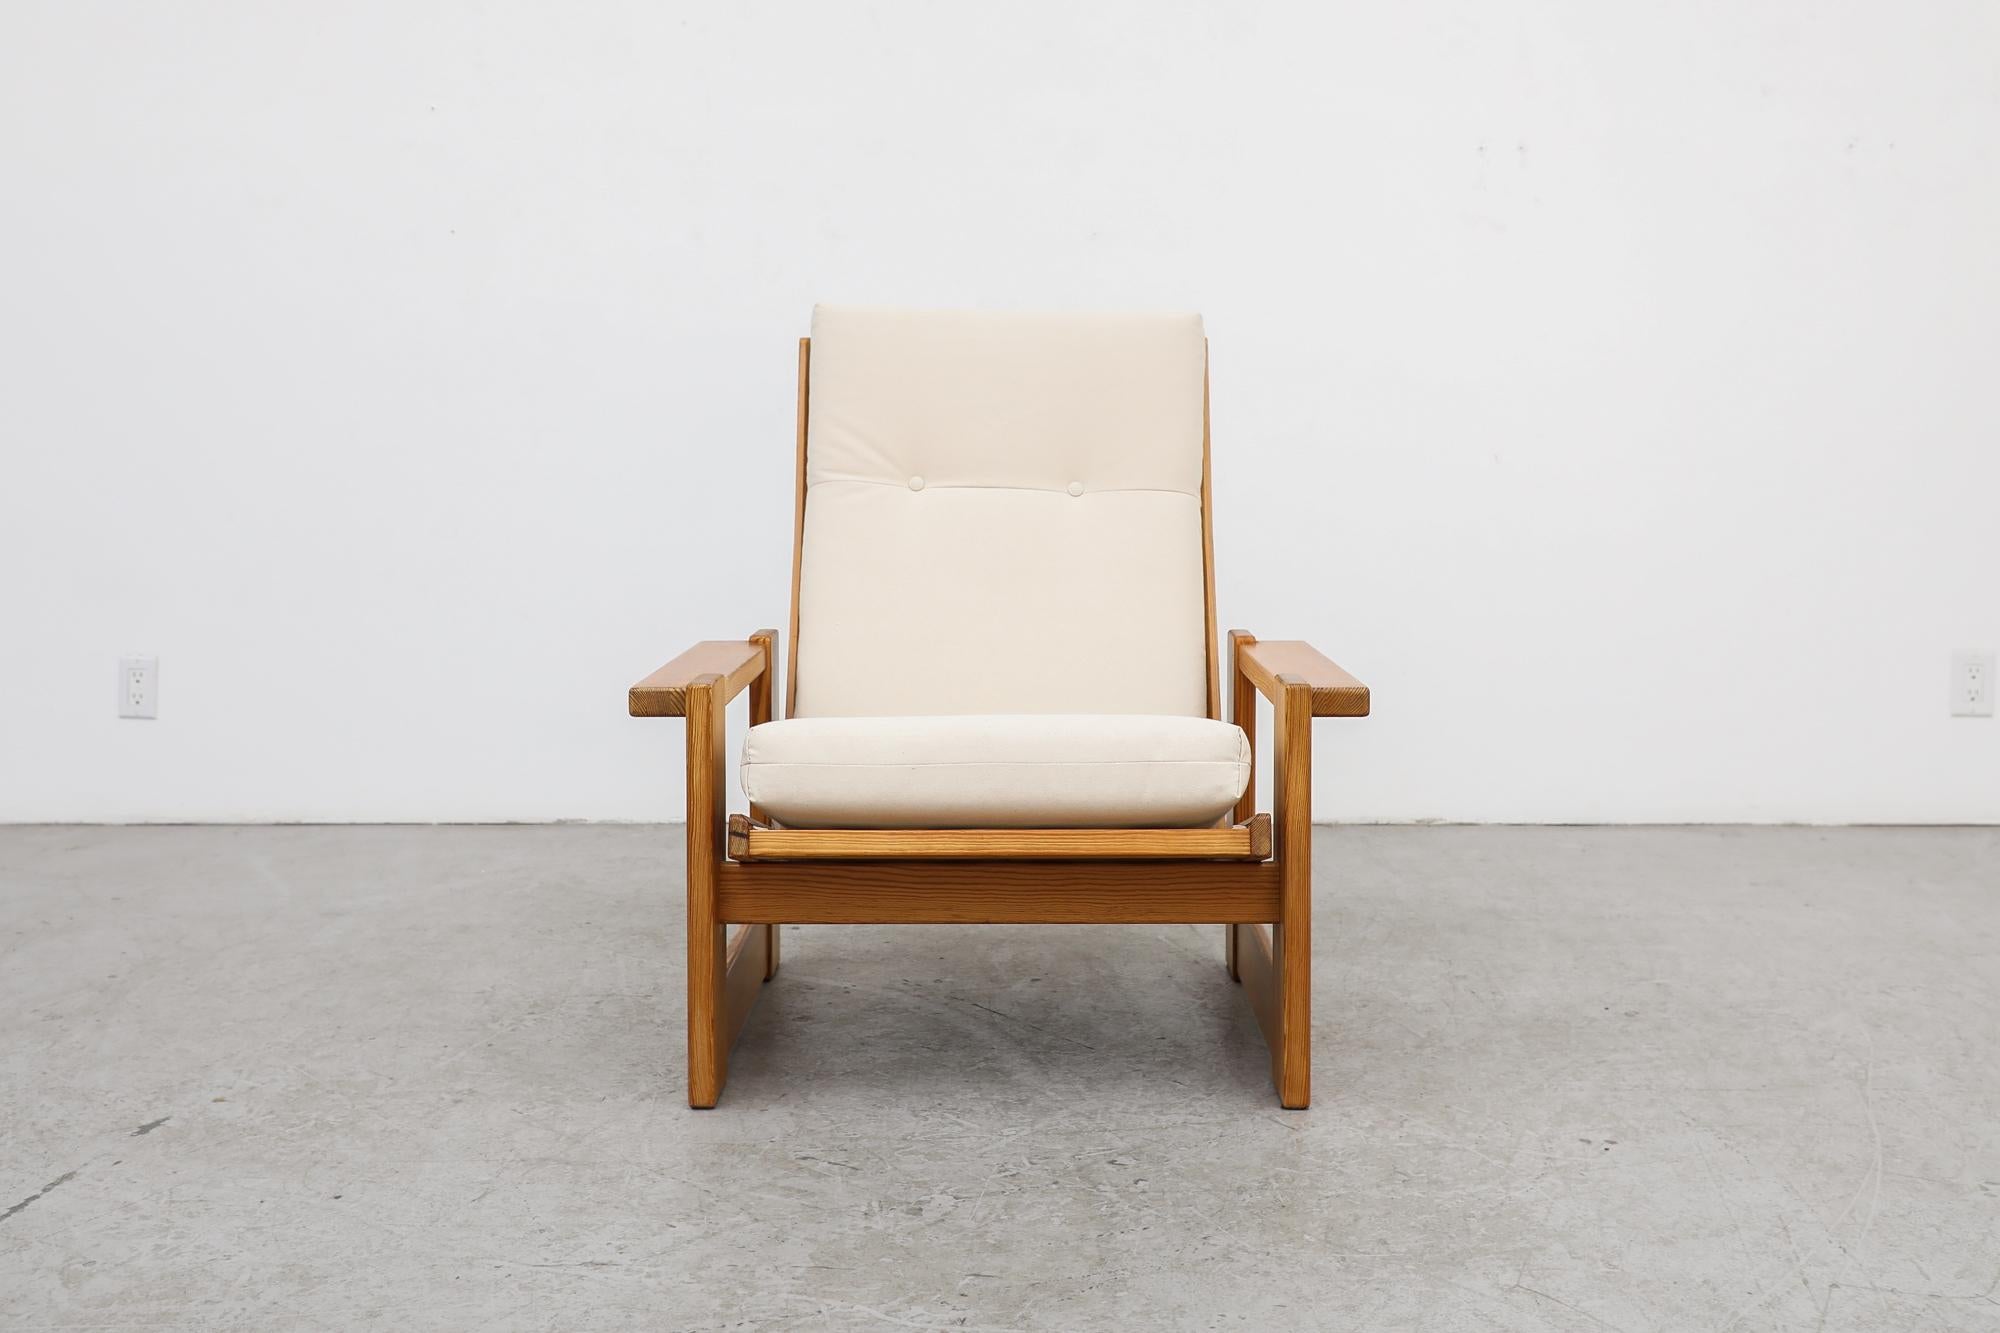 This strikingly austere, mid century, crate style lounge chair in the manner of Edvin Helseth is made from pine and has new natural canvas upholstered seating. The frame is in good original condition with wear consistent with its age and use. Other